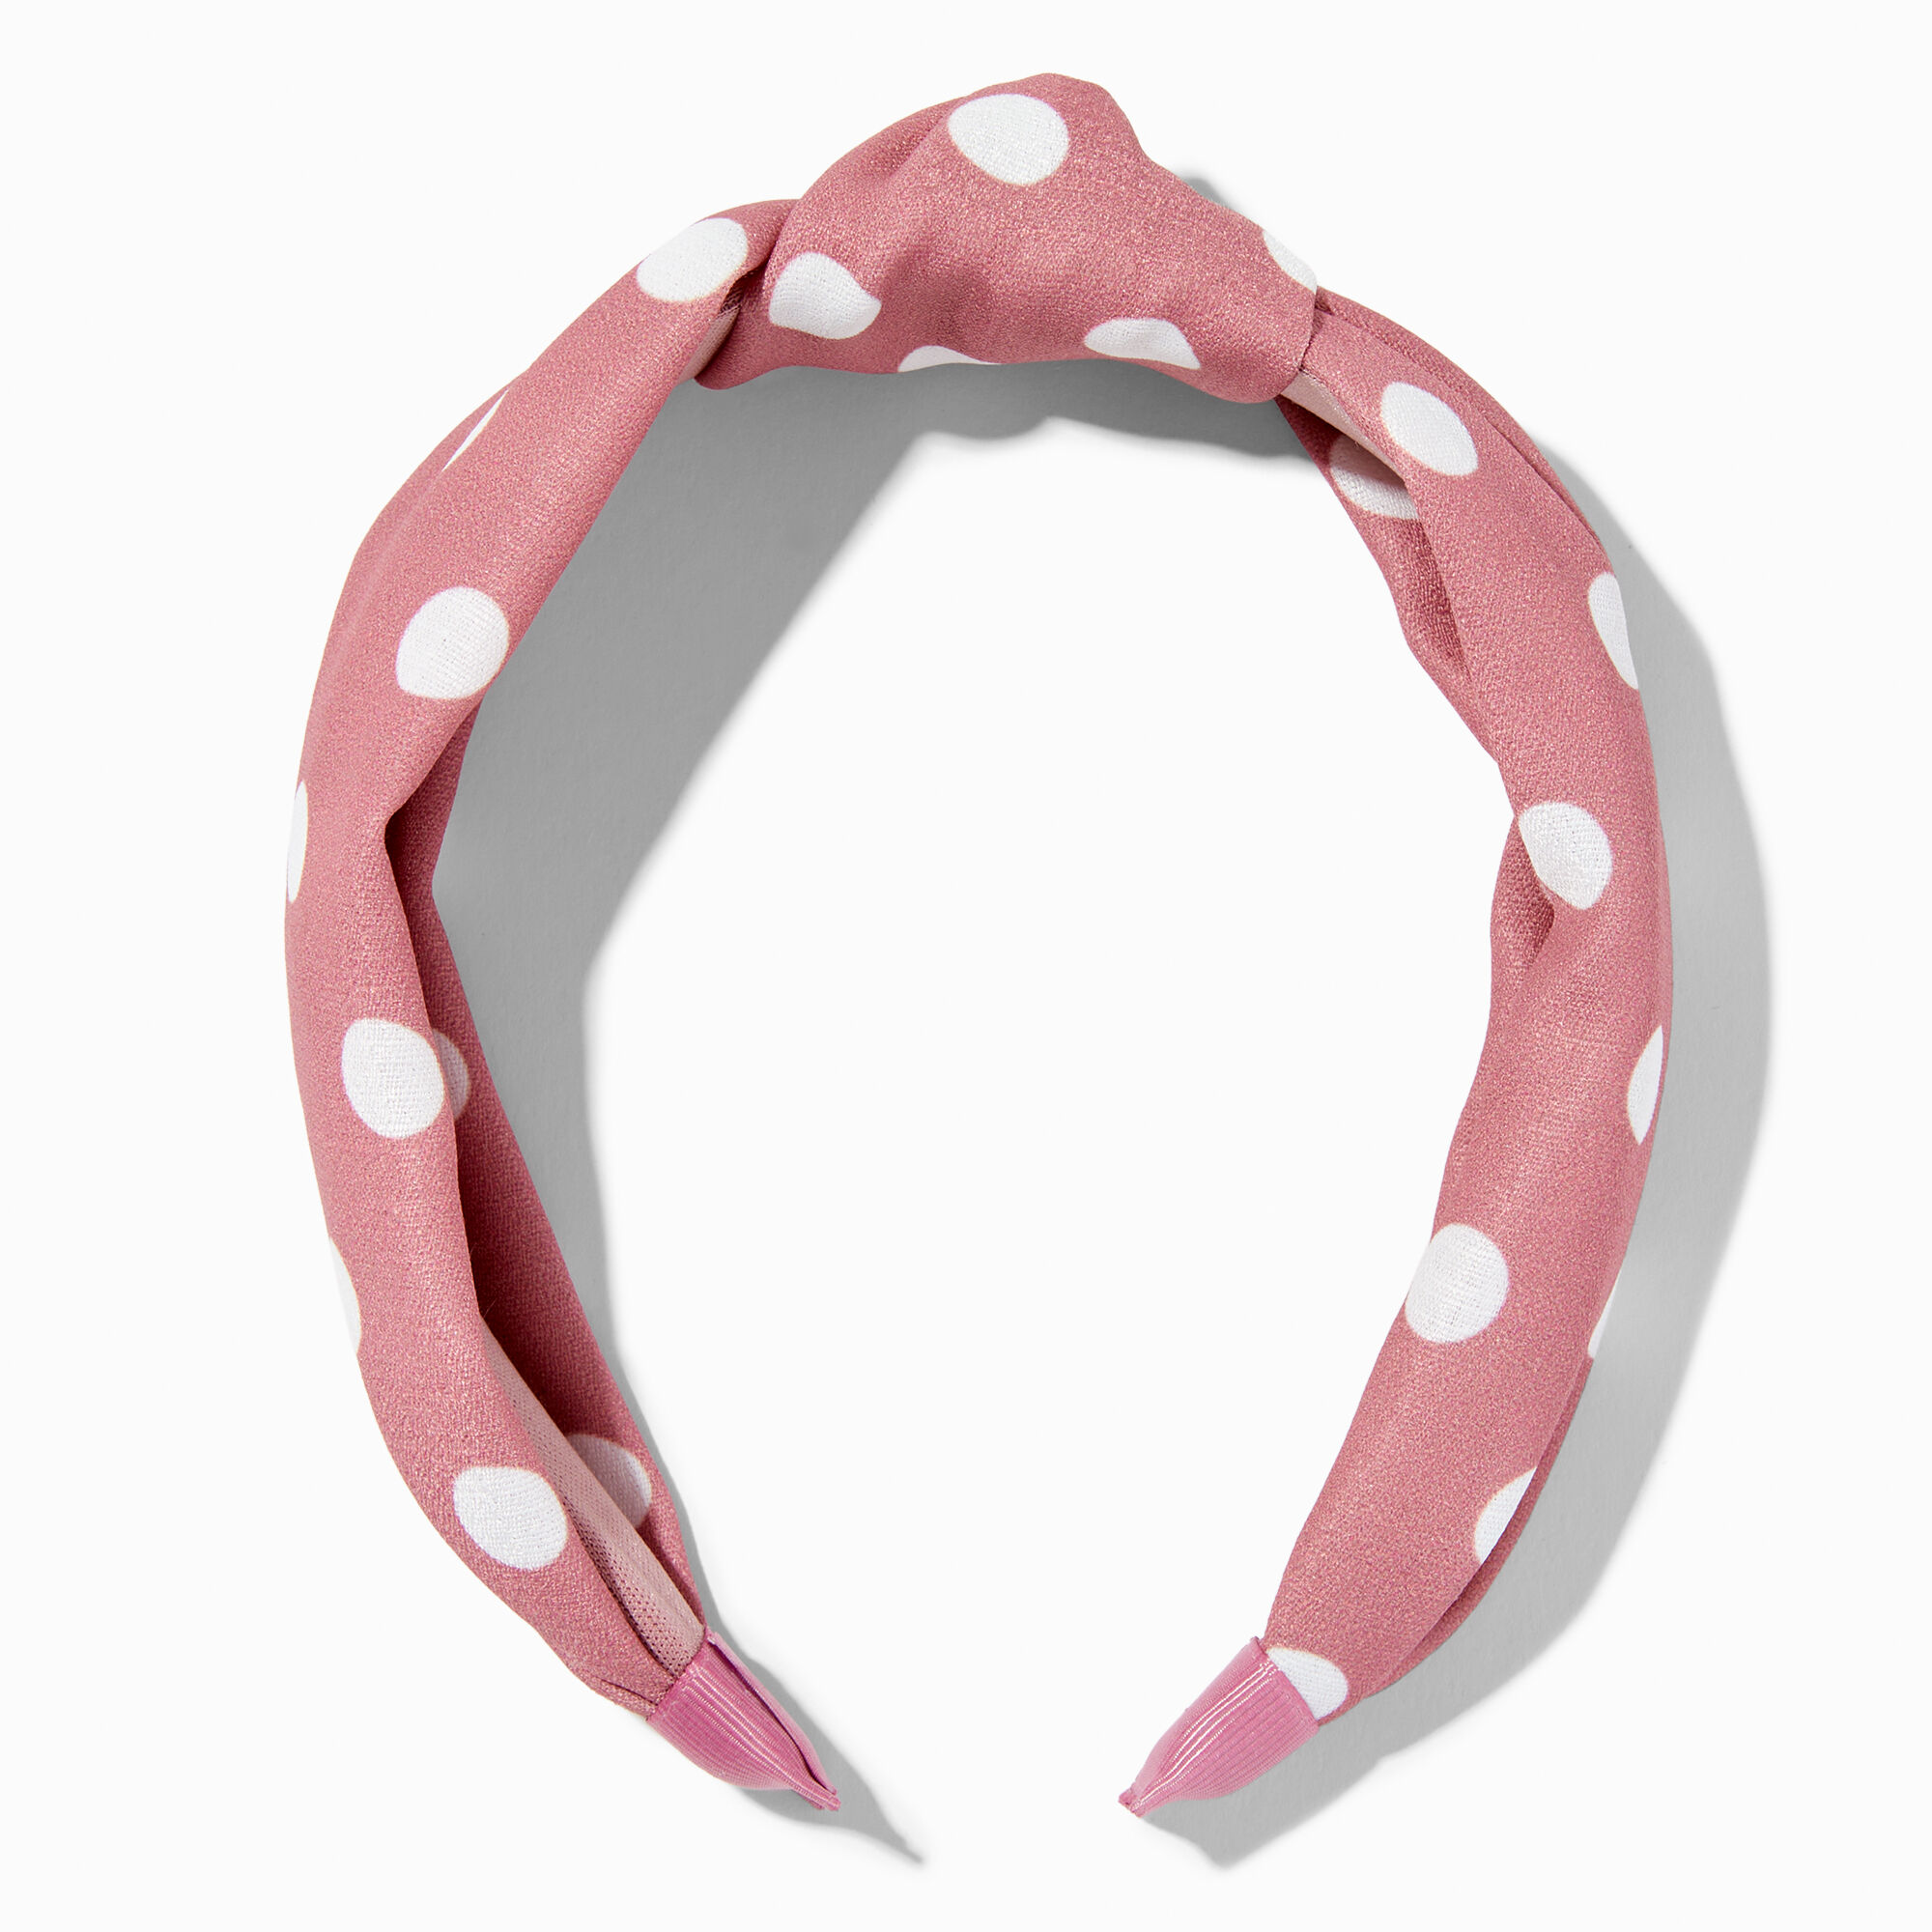 View Claires Mauve Dot Knotted Headband White information